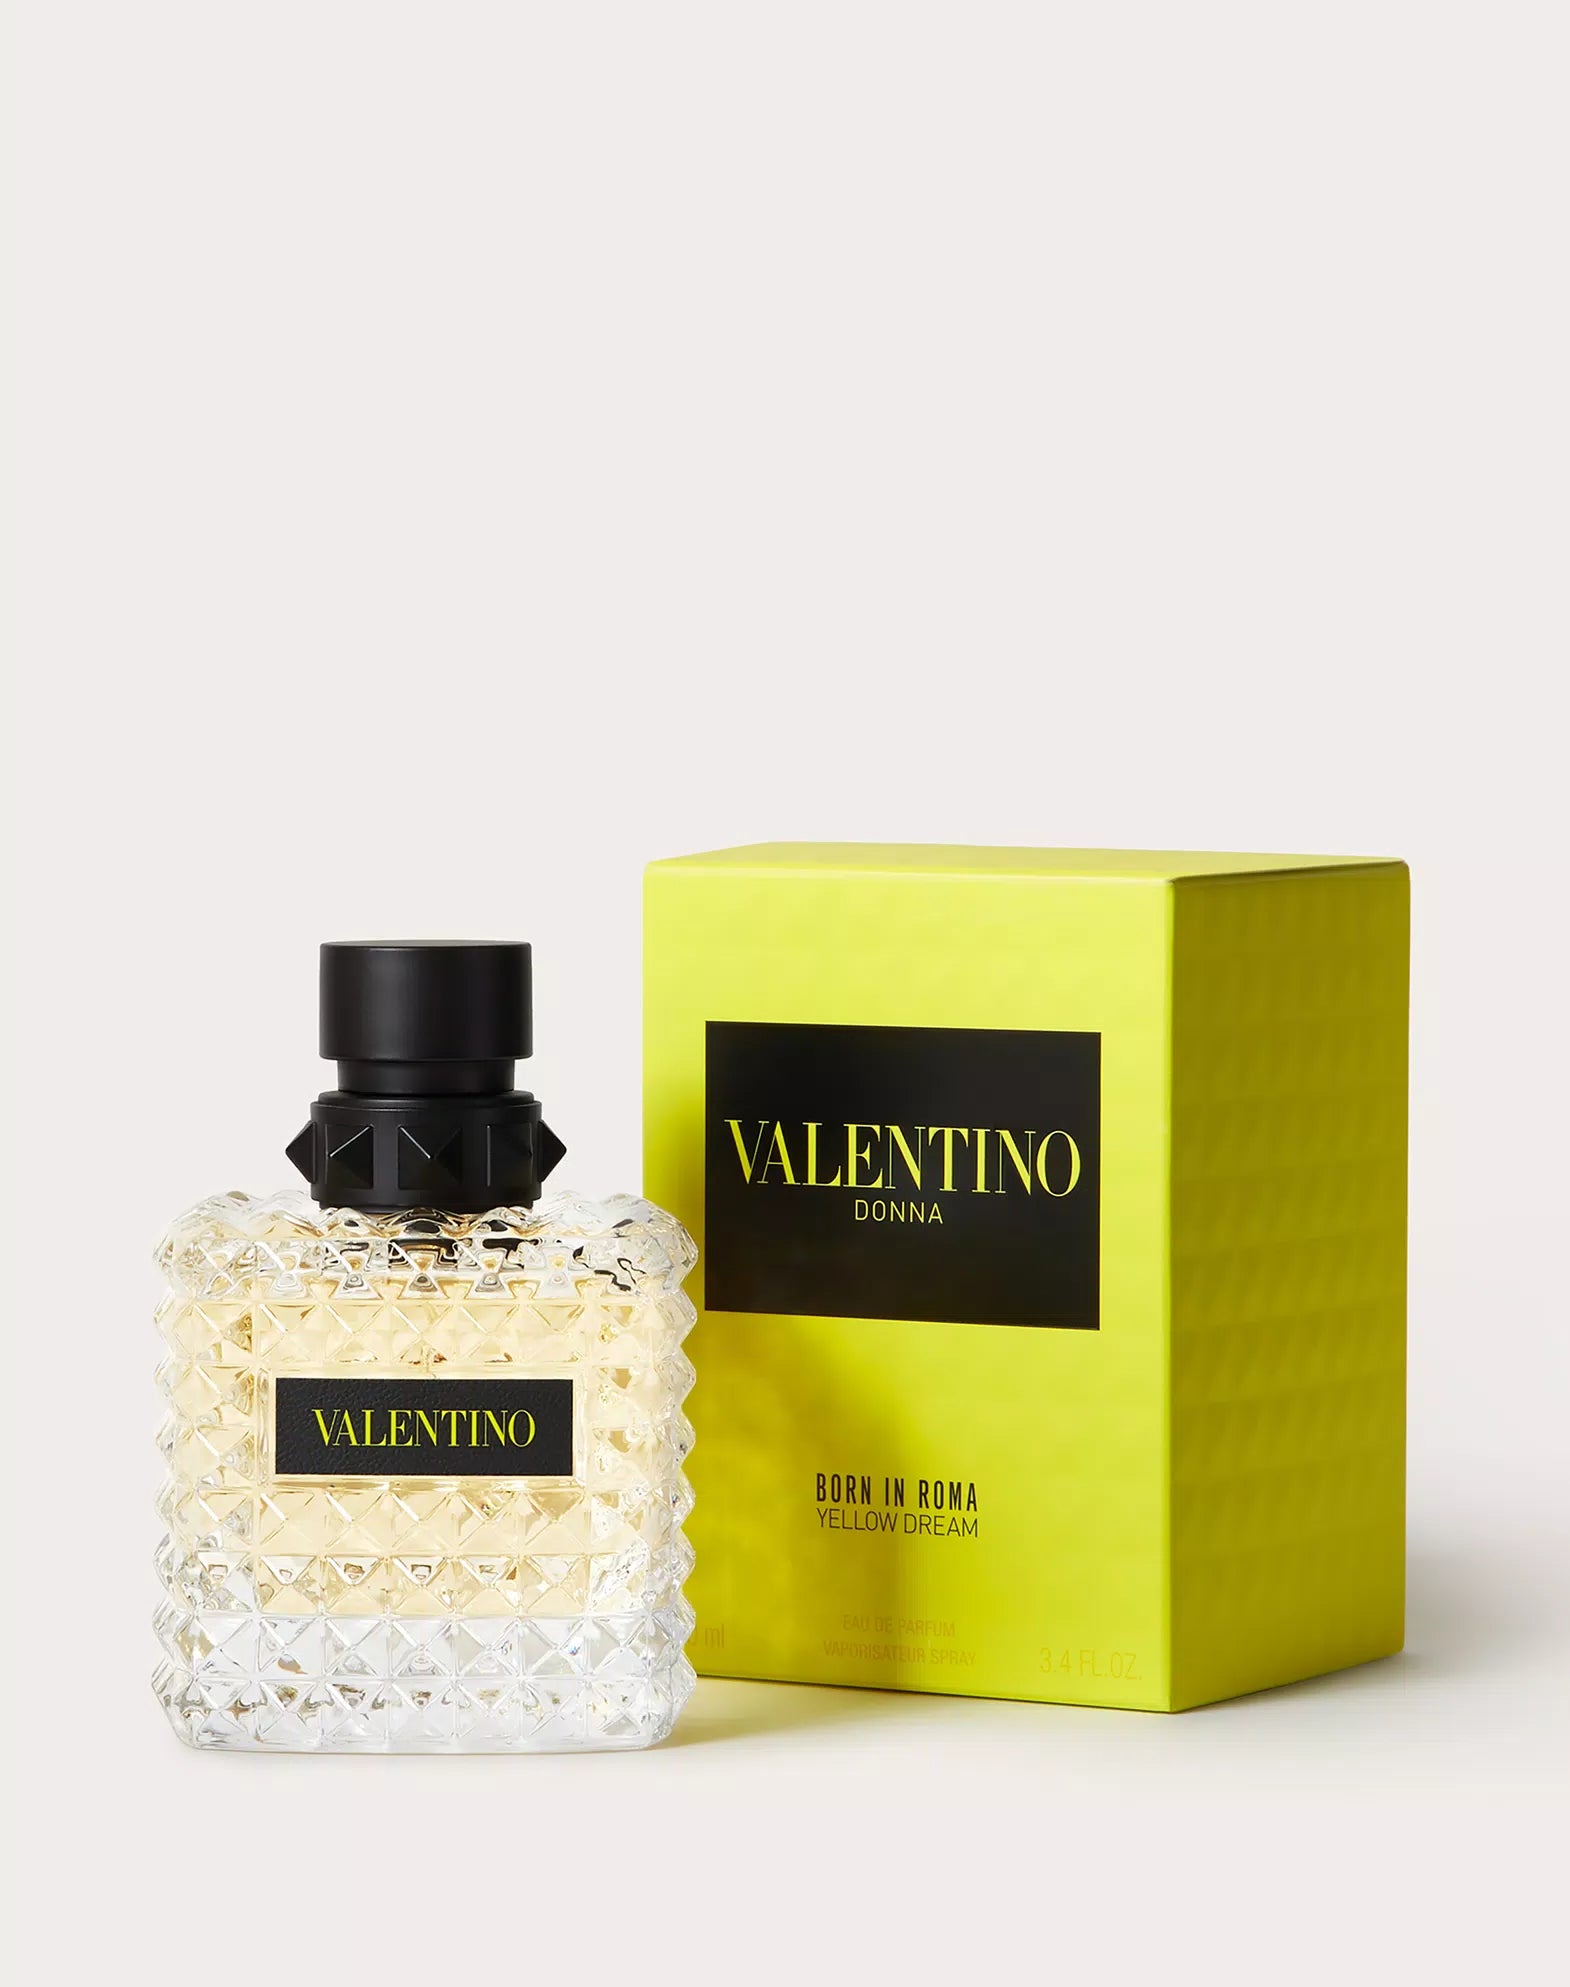 Born In Roma Yellow Dream Eau de Parfum Spray for Women by Valentino, Product image 1